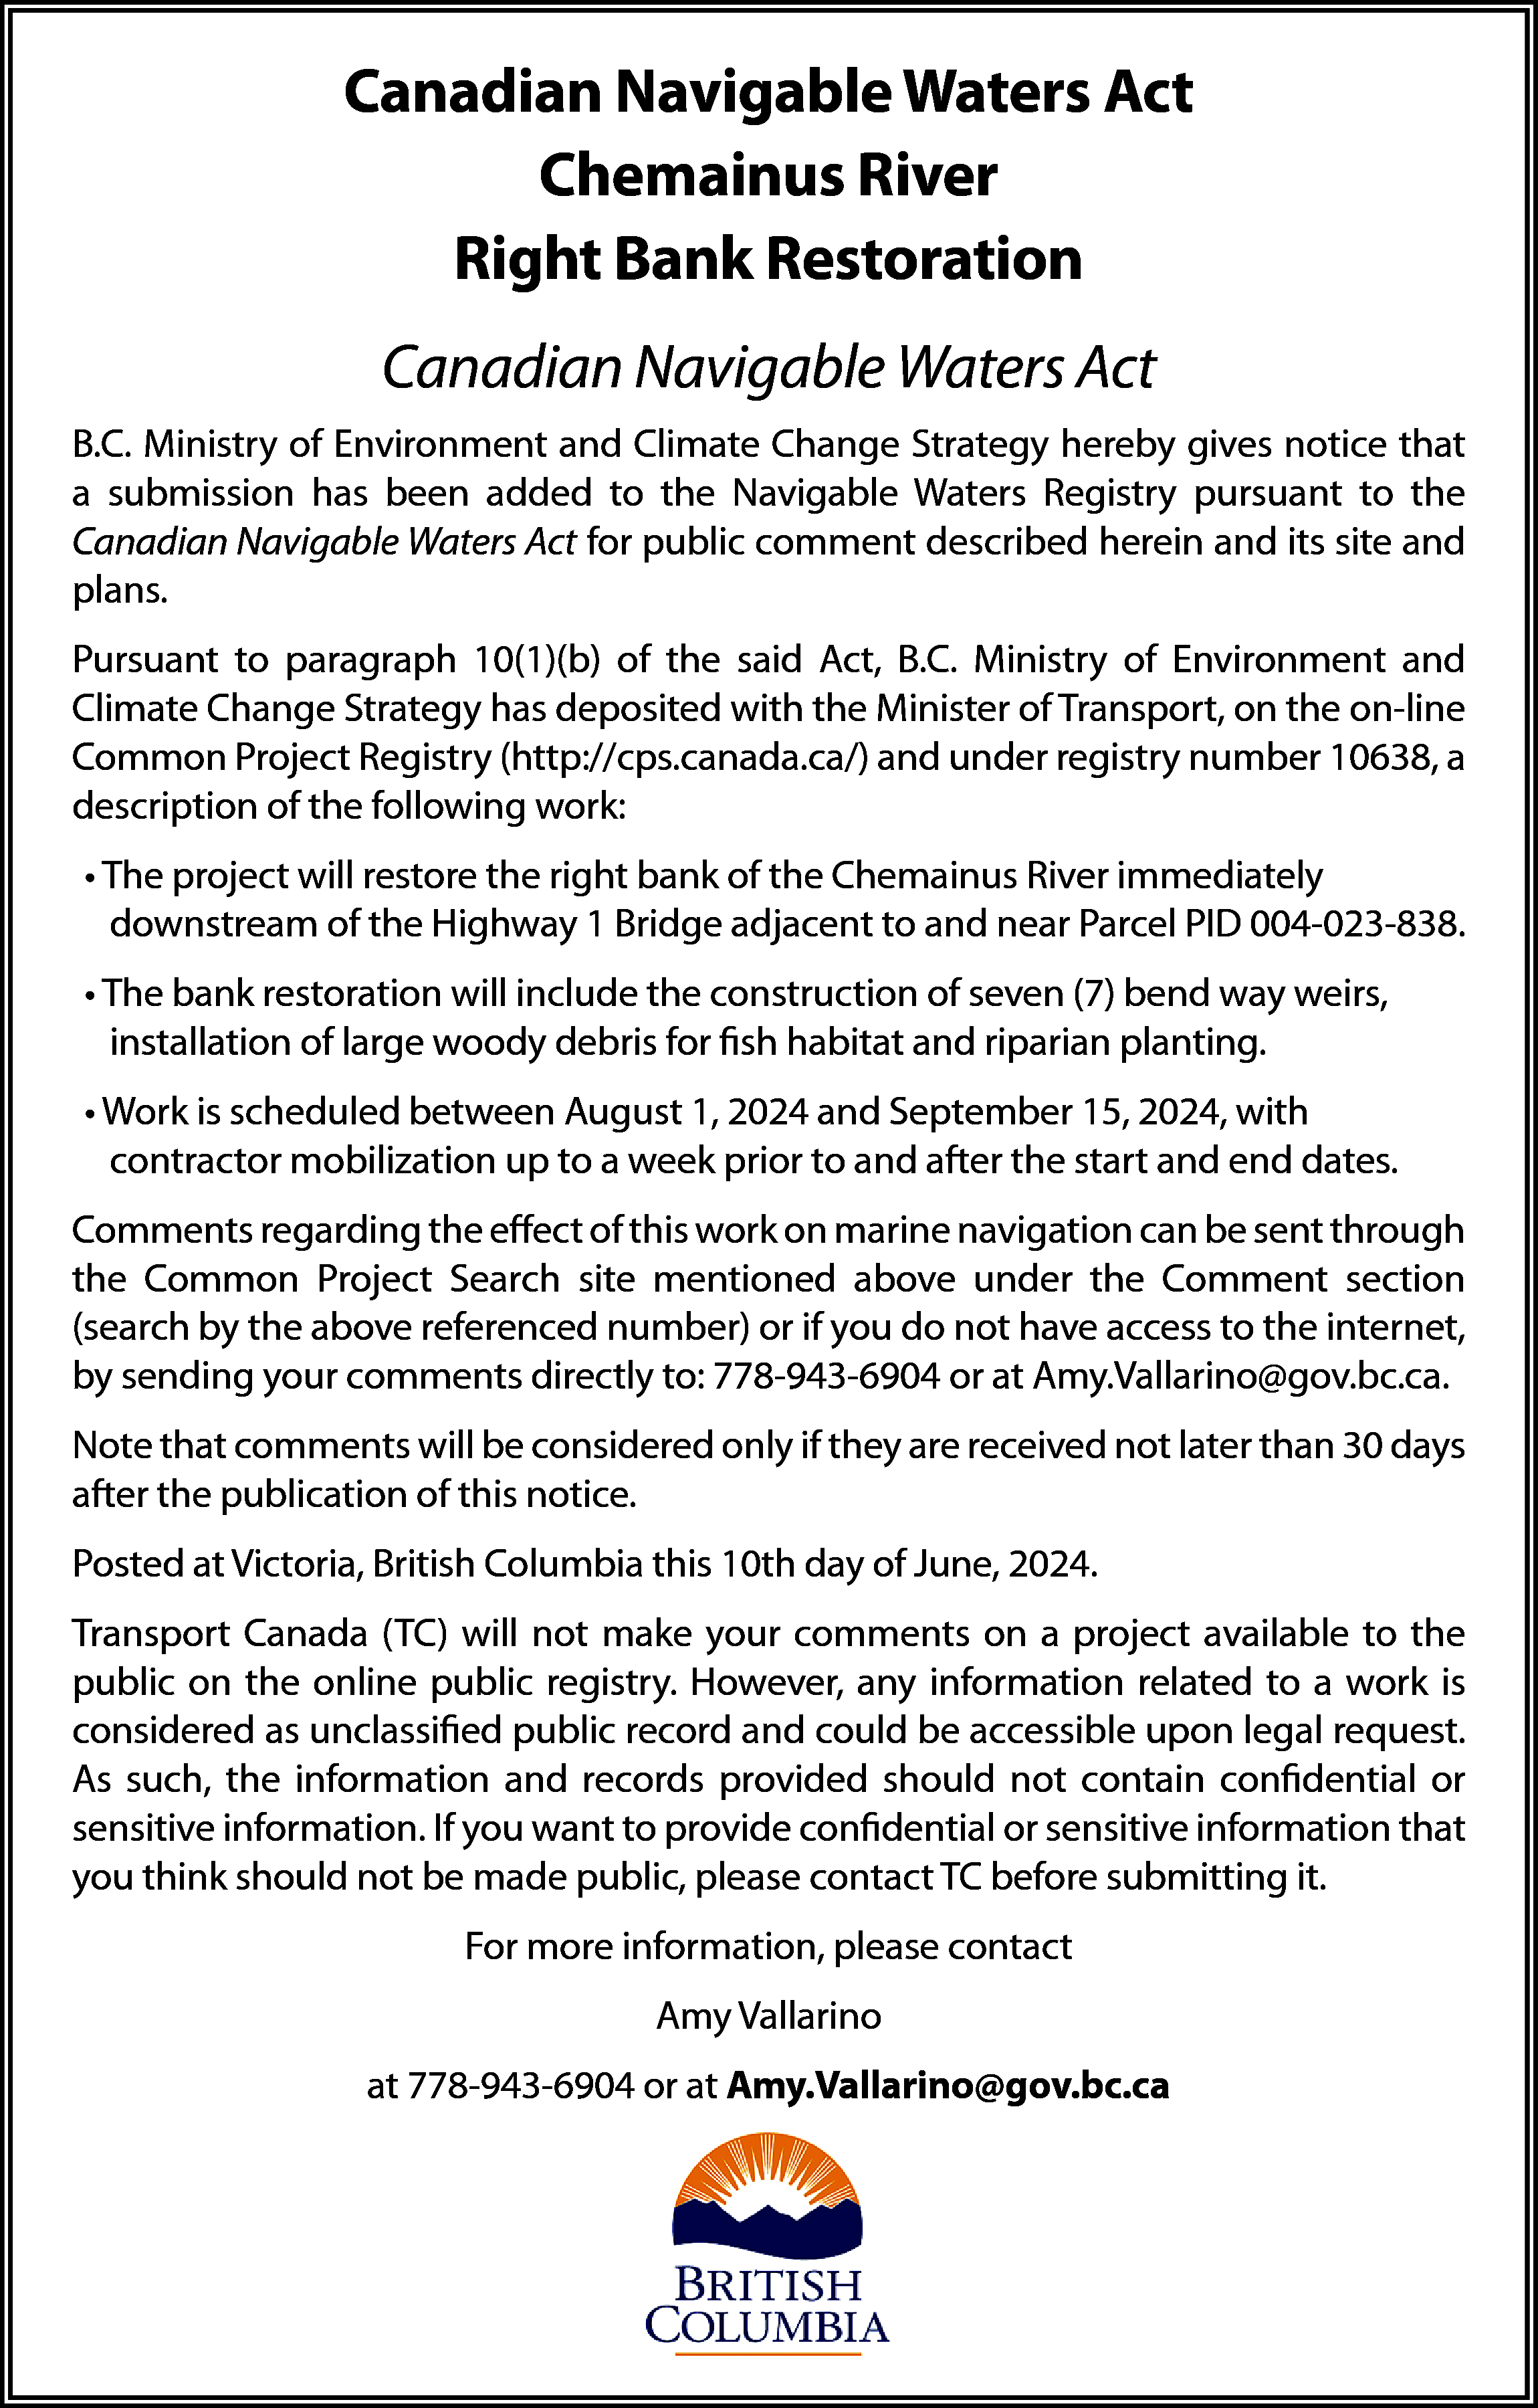 Canadian Navigable Waters Act <br>Chemainus  Canadian Navigable Waters Act  Chemainus River  Right Bank Restoration  Canadian Navigable Waters Act  B.C. Ministry of Environment and Climate Change Strategy hereby gives notice that  a submission has been added to the Navigable Waters Registry pursuant to the  Canadian Navigable Waters Act for public comment described herein and its site and  plans.  Pursuant to paragraph 10(1)(b) of the said Act, B.C. Ministry of Environment and  Climate Change Strategy has deposited with the Minister of Transport, on the on-line  Common Project Registry (http://cps.canada.ca/) and under registry number 10638, a  description of the following work:  • The project will restore the right bank of the Chemainus River immediately  downstream of the Highway 1 Bridge adjacent to and near Parcel PID 004-023-838.  • The bank restoration will include the construction of seven (7) bend way weirs,  installation of large woody debris for fish habitat and riparian planting.  • Work is scheduled between August 1, 2024 and September 15, 2024, with  contractor mobilization up to a week prior to and after the start and end dates.  Comments regarding the effect of this work on marine navigation can be sent through  the Common Project Search site mentioned above under the Comment section  (search by the above referenced number) or if you do not have access to the internet,  by sending your comments directly to: 778-943-6904 or at Amy.Vallarino@gov.bc.ca.  Note that comments will be considered only if they are received not later than 30 days  after the publication of this notice.  Posted at Victoria, British Columbia this 10th day of June, 2024.  Transport Canada (TC) will not make your comments on a project available to the  public on the online public registry. However, any information related to a work is  considered as unclassified public record and could be accessible upon legal request.  As such, the information and records provided should not contain confidential or  sensitive information. If you want to provide confidential or sensitive information that  you think should not be made public, please contact TC before submitting it.  For more information, please contact  Amy Vallarino  at 778-943-6904 or at Amy.Vallarino@gov.bc.ca    